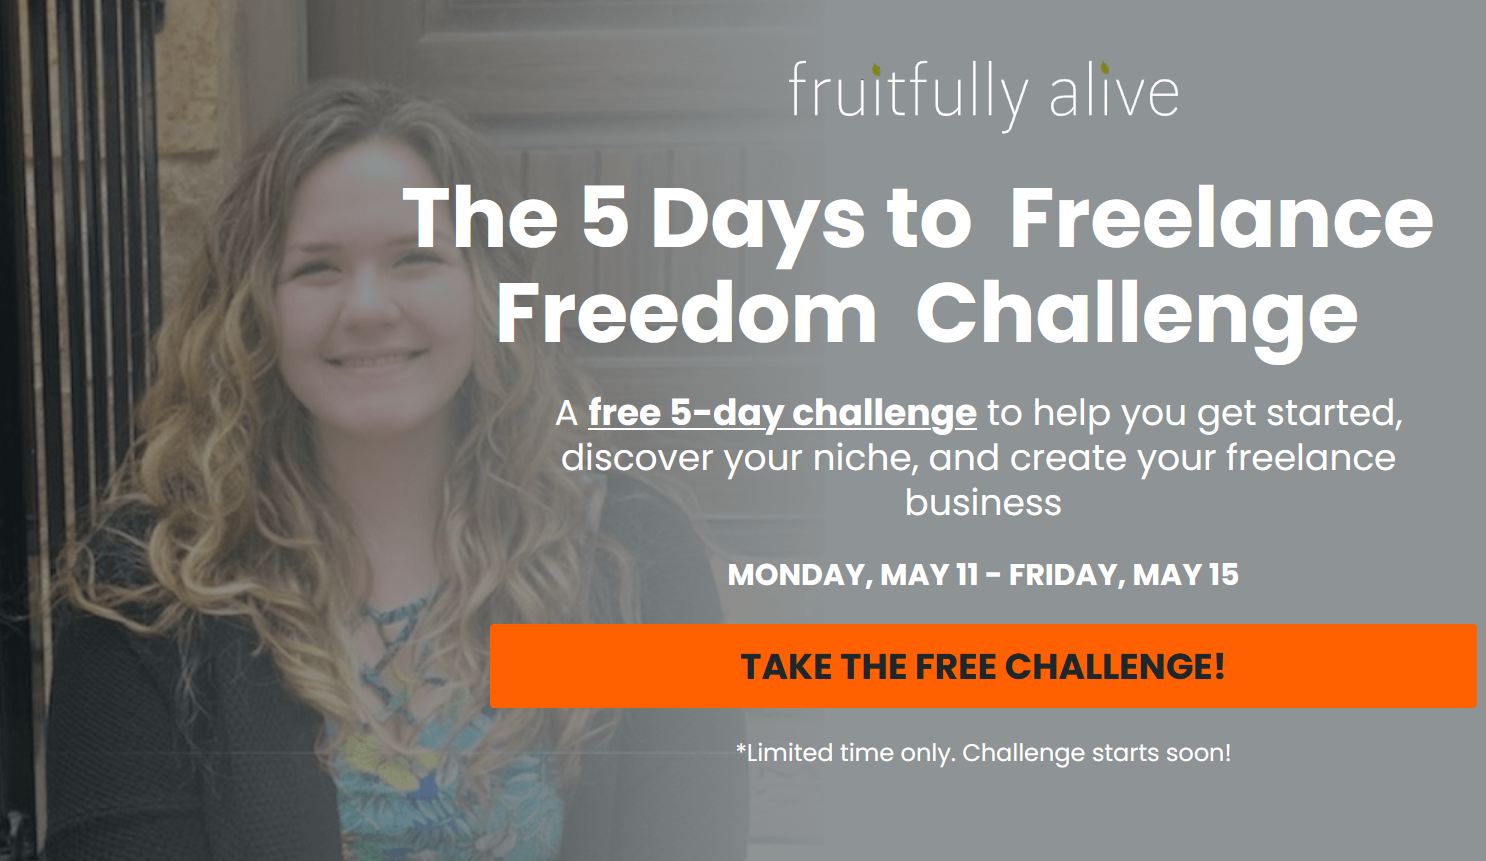 Fruitfully alive: The 5 Days to Freelance Freedom Challenge